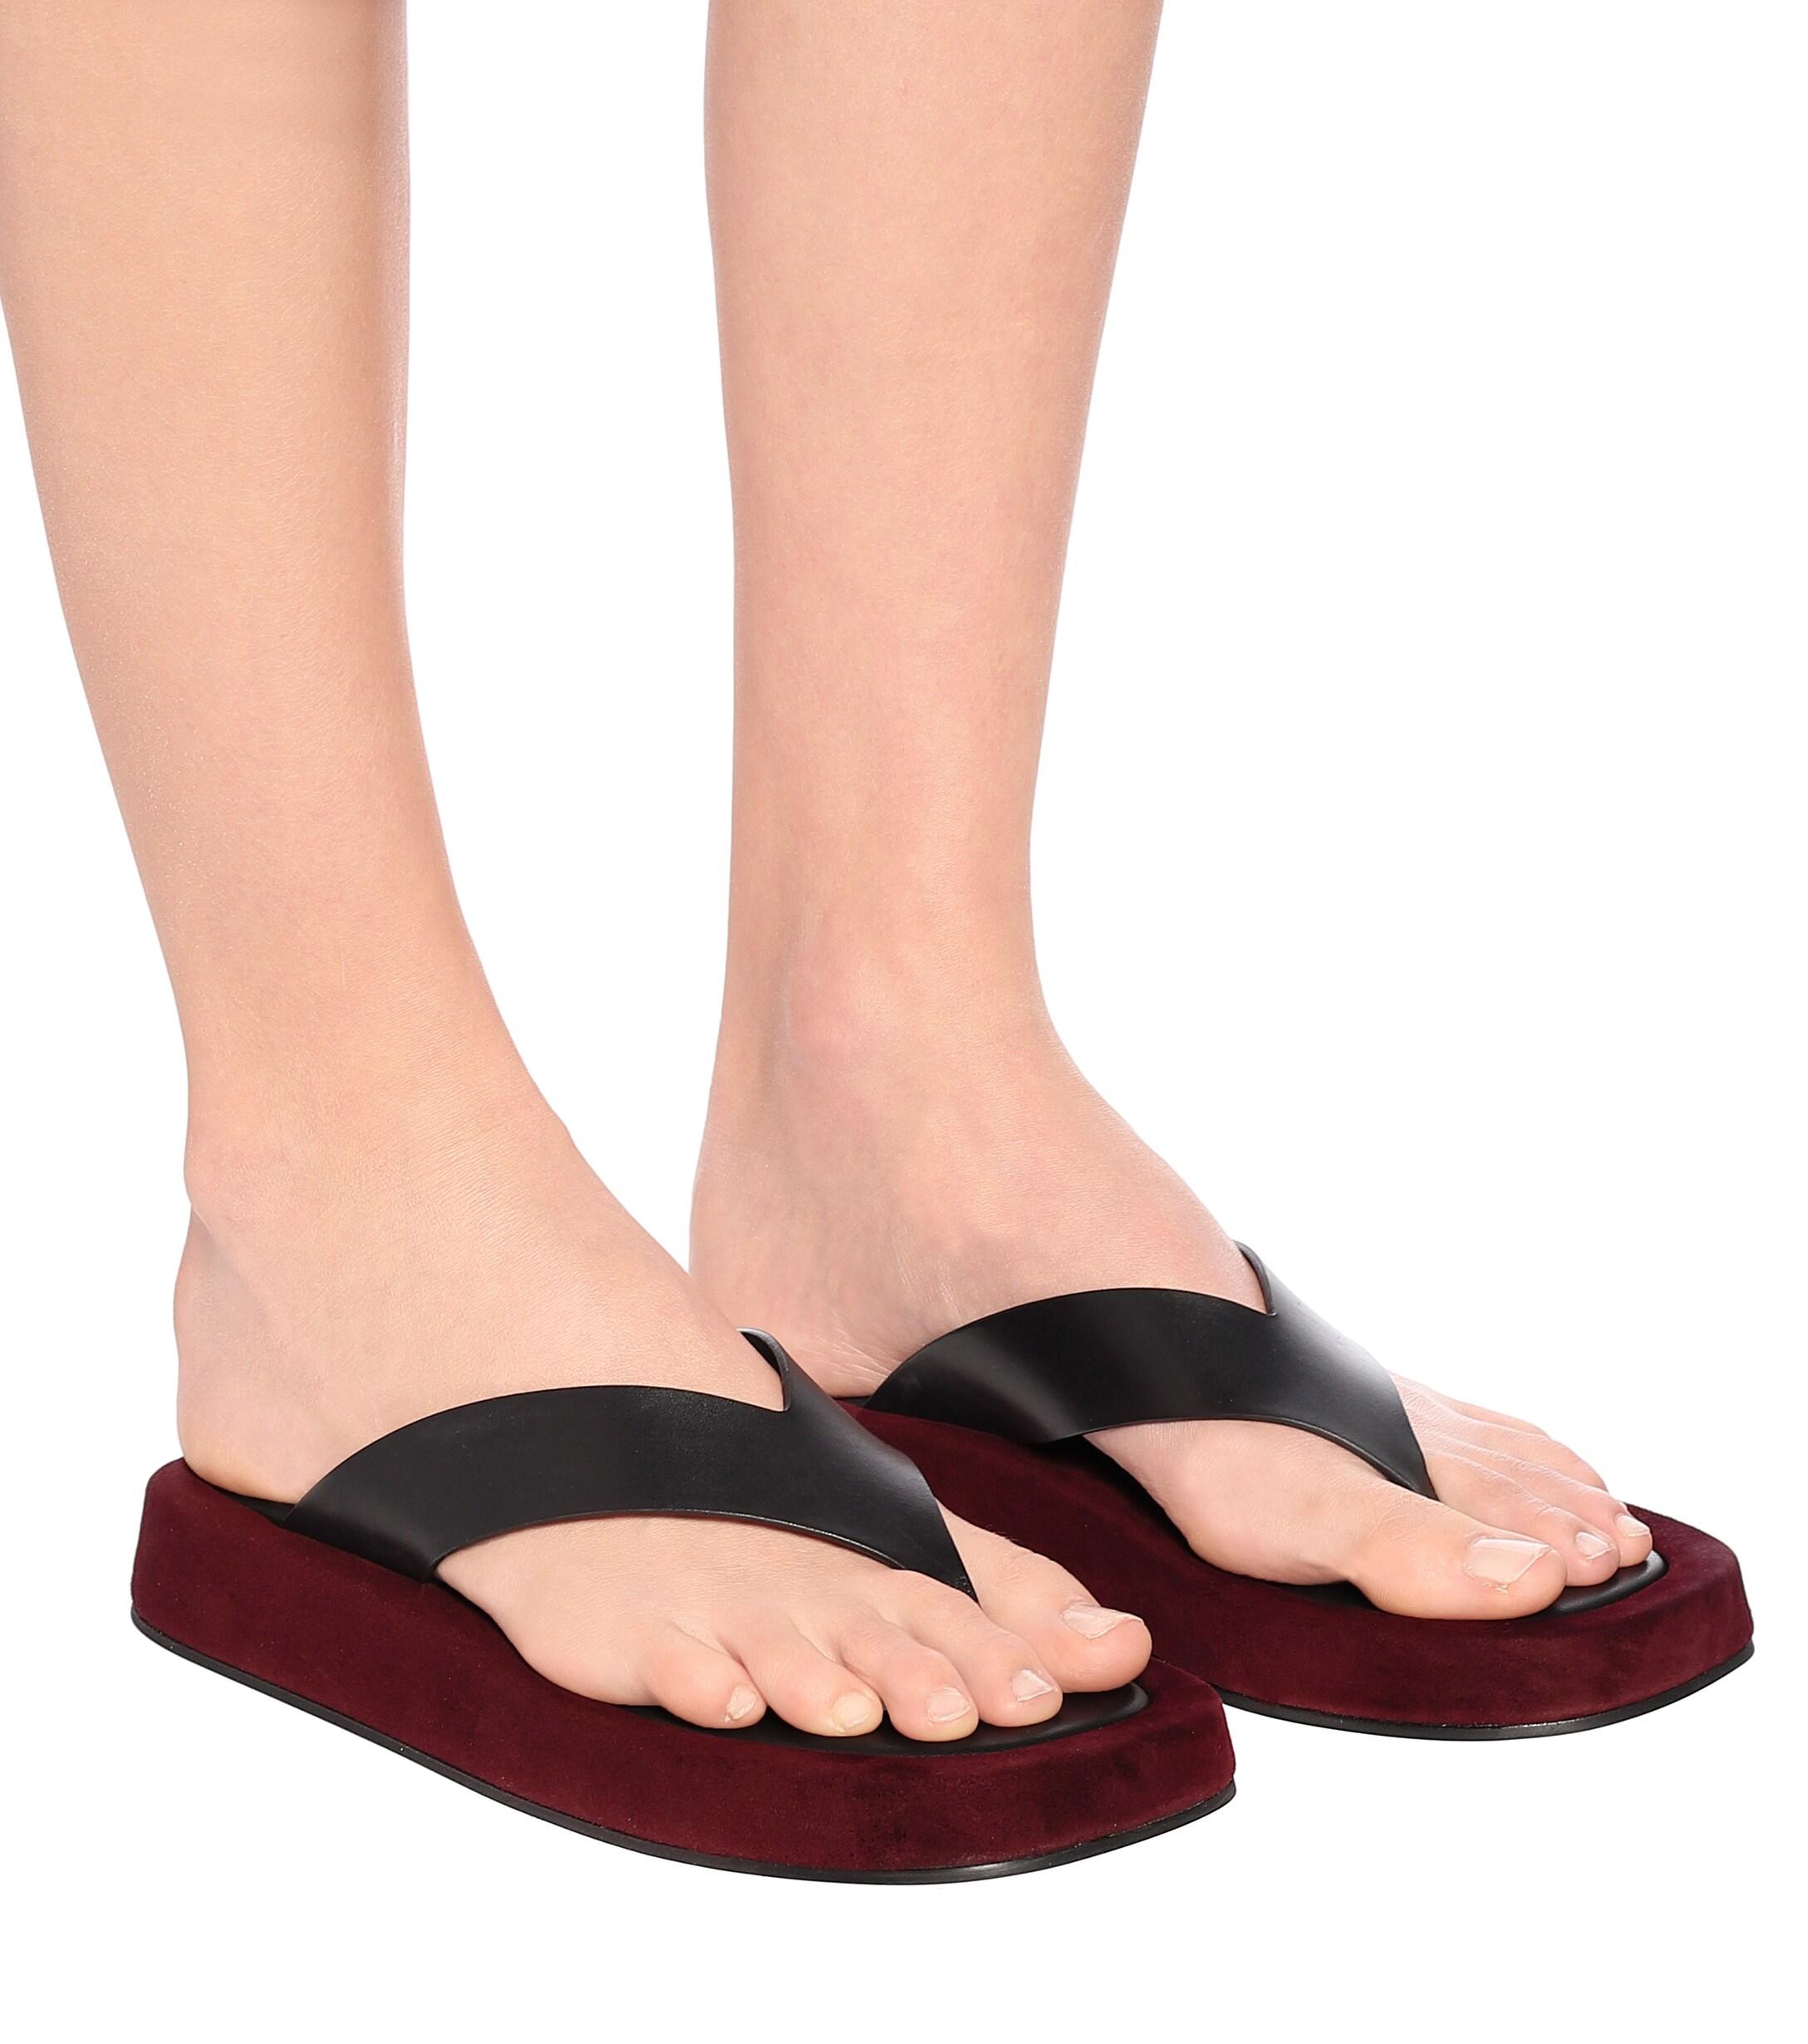 The Row Ginza Sandals in Black - Burgundy (Black) - Lyst